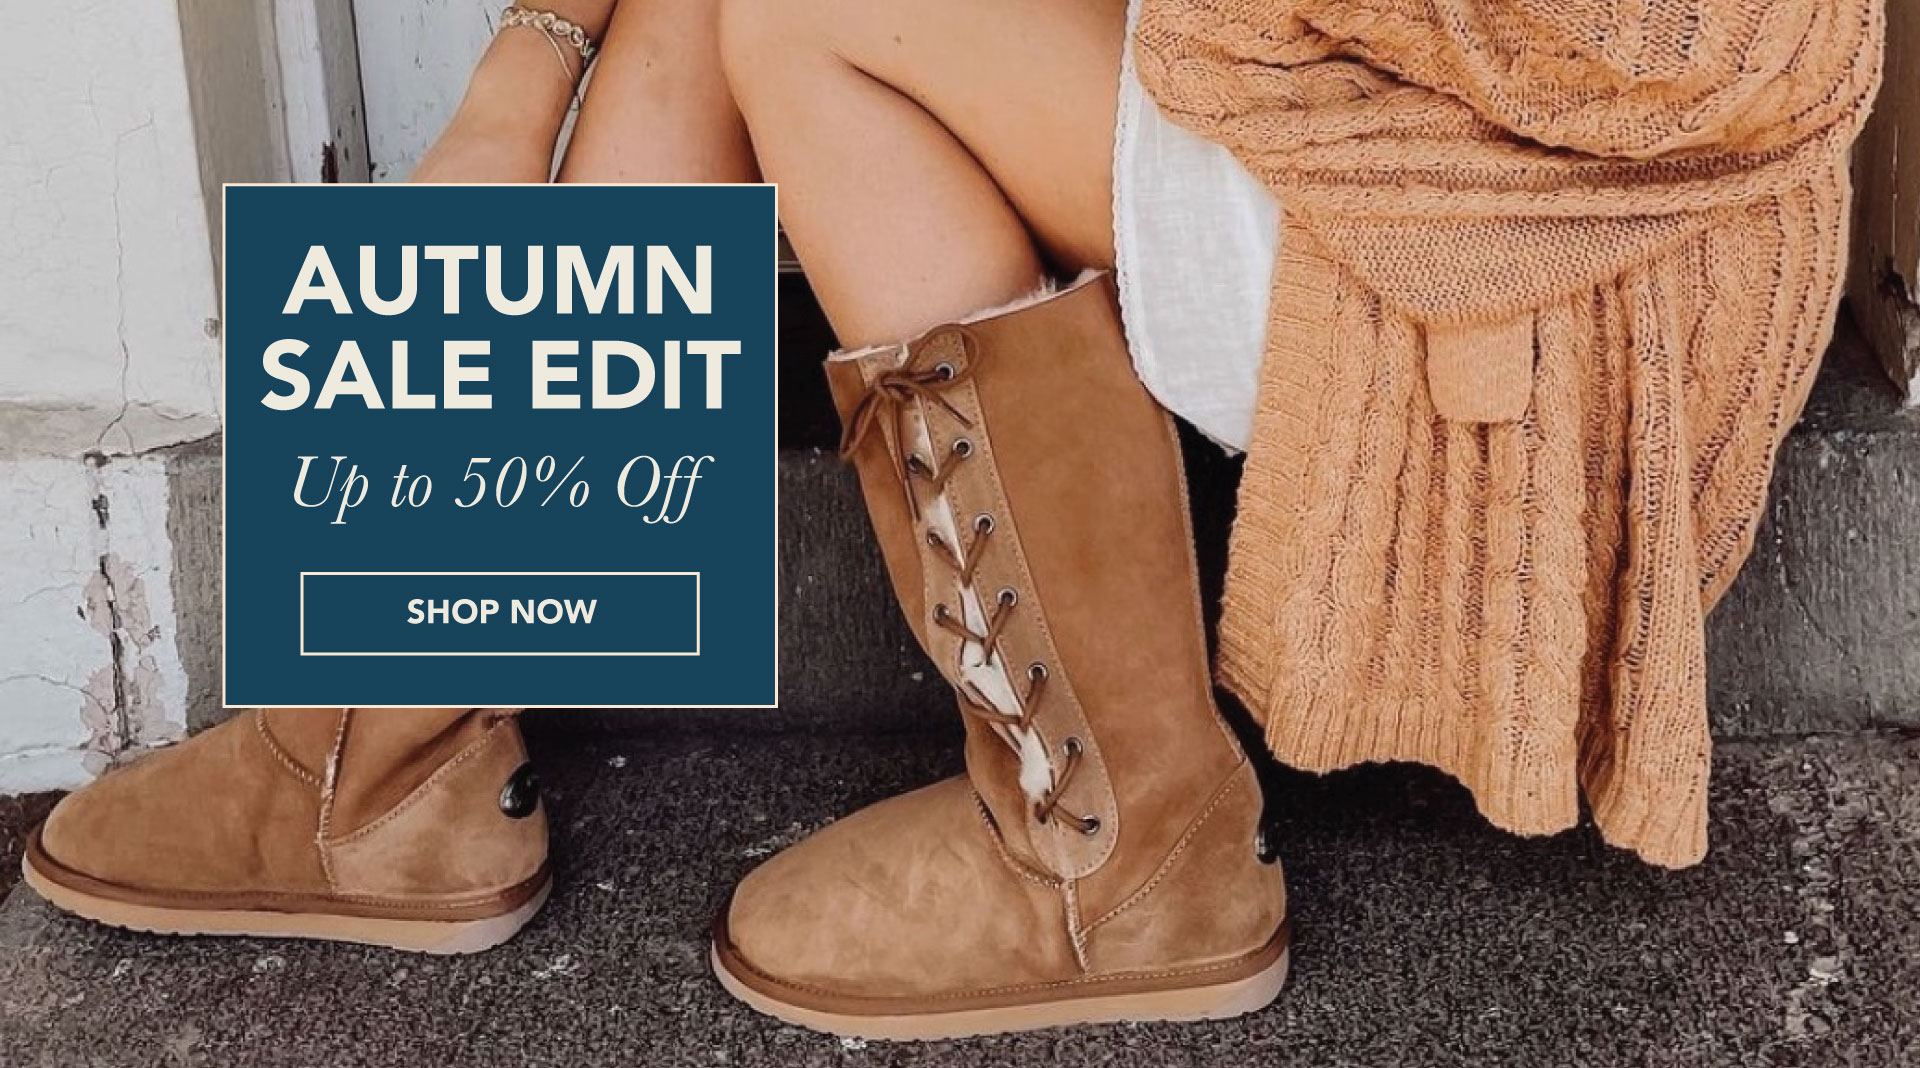 women and children wearing EMU sheepskin boots & slippers. TEXT reads:Autumn Sale Edit Up to 50% Off